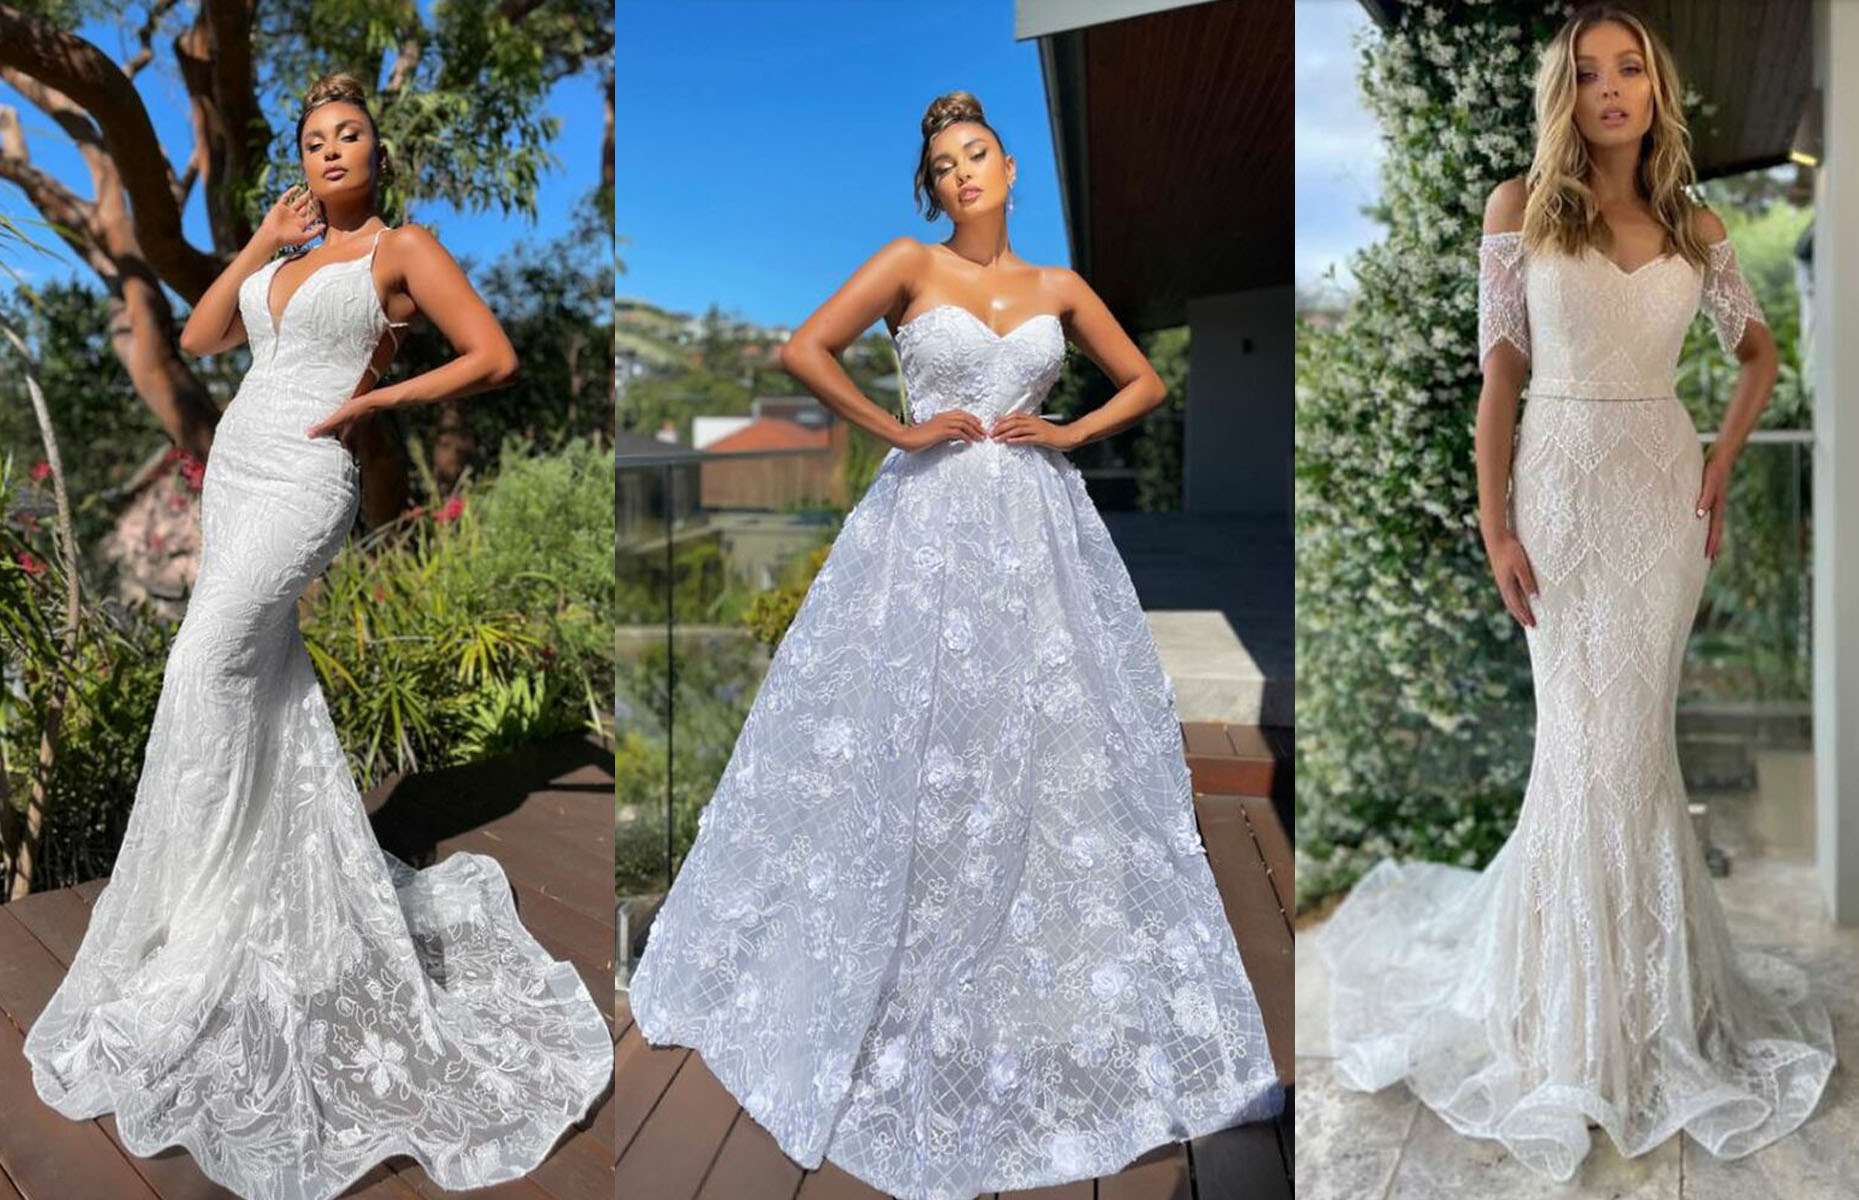 Casual Wedding Dress and Bridal Reception Dresses for Spring by Jadore Evening at Fashionably Yours Bridal & Formal Wear Sydney